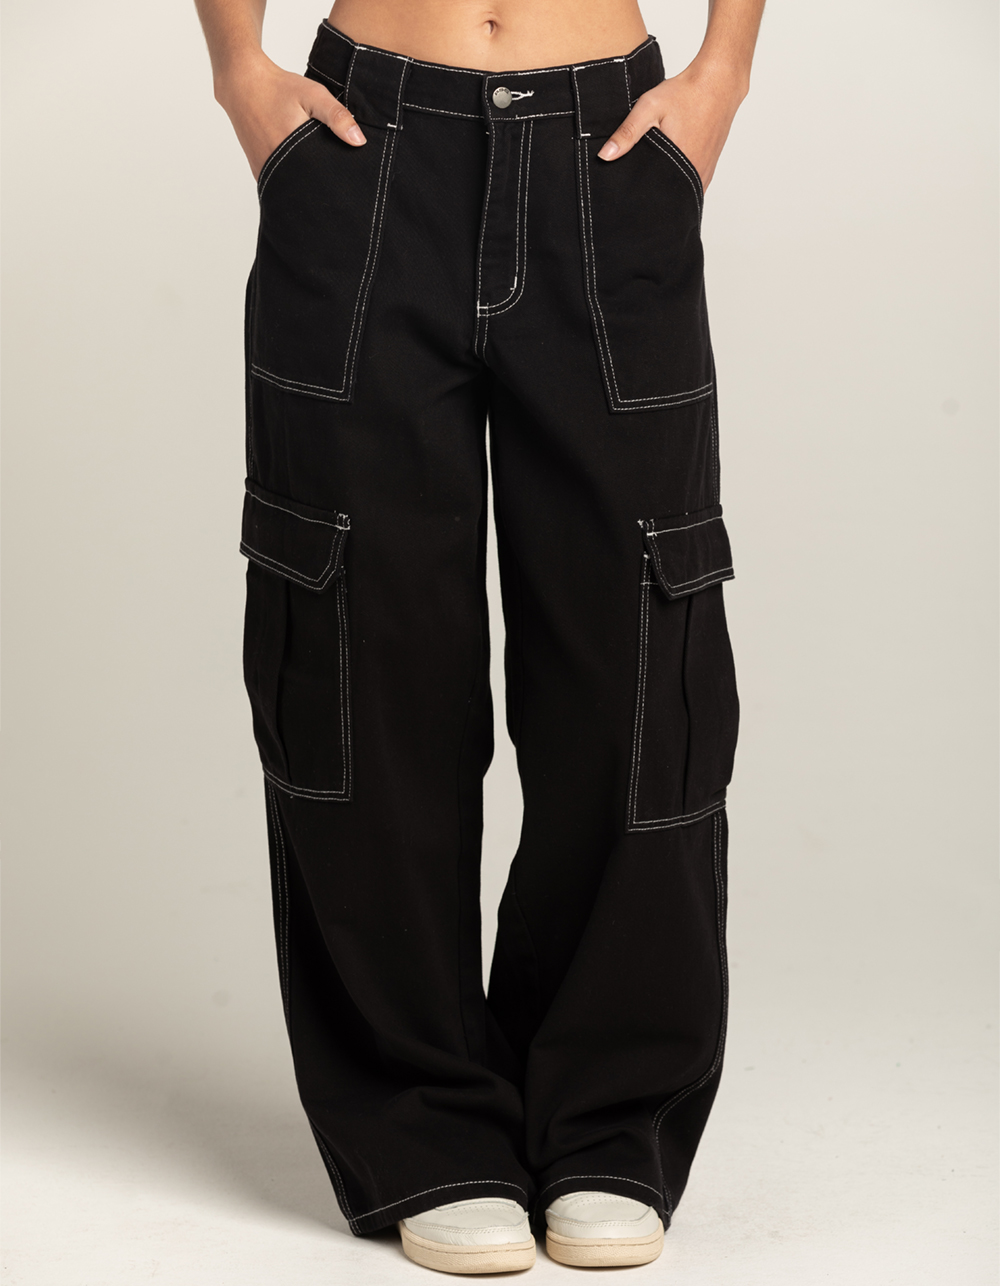 shop PANT Straight-Leg Cargo Pants for women by Forever21